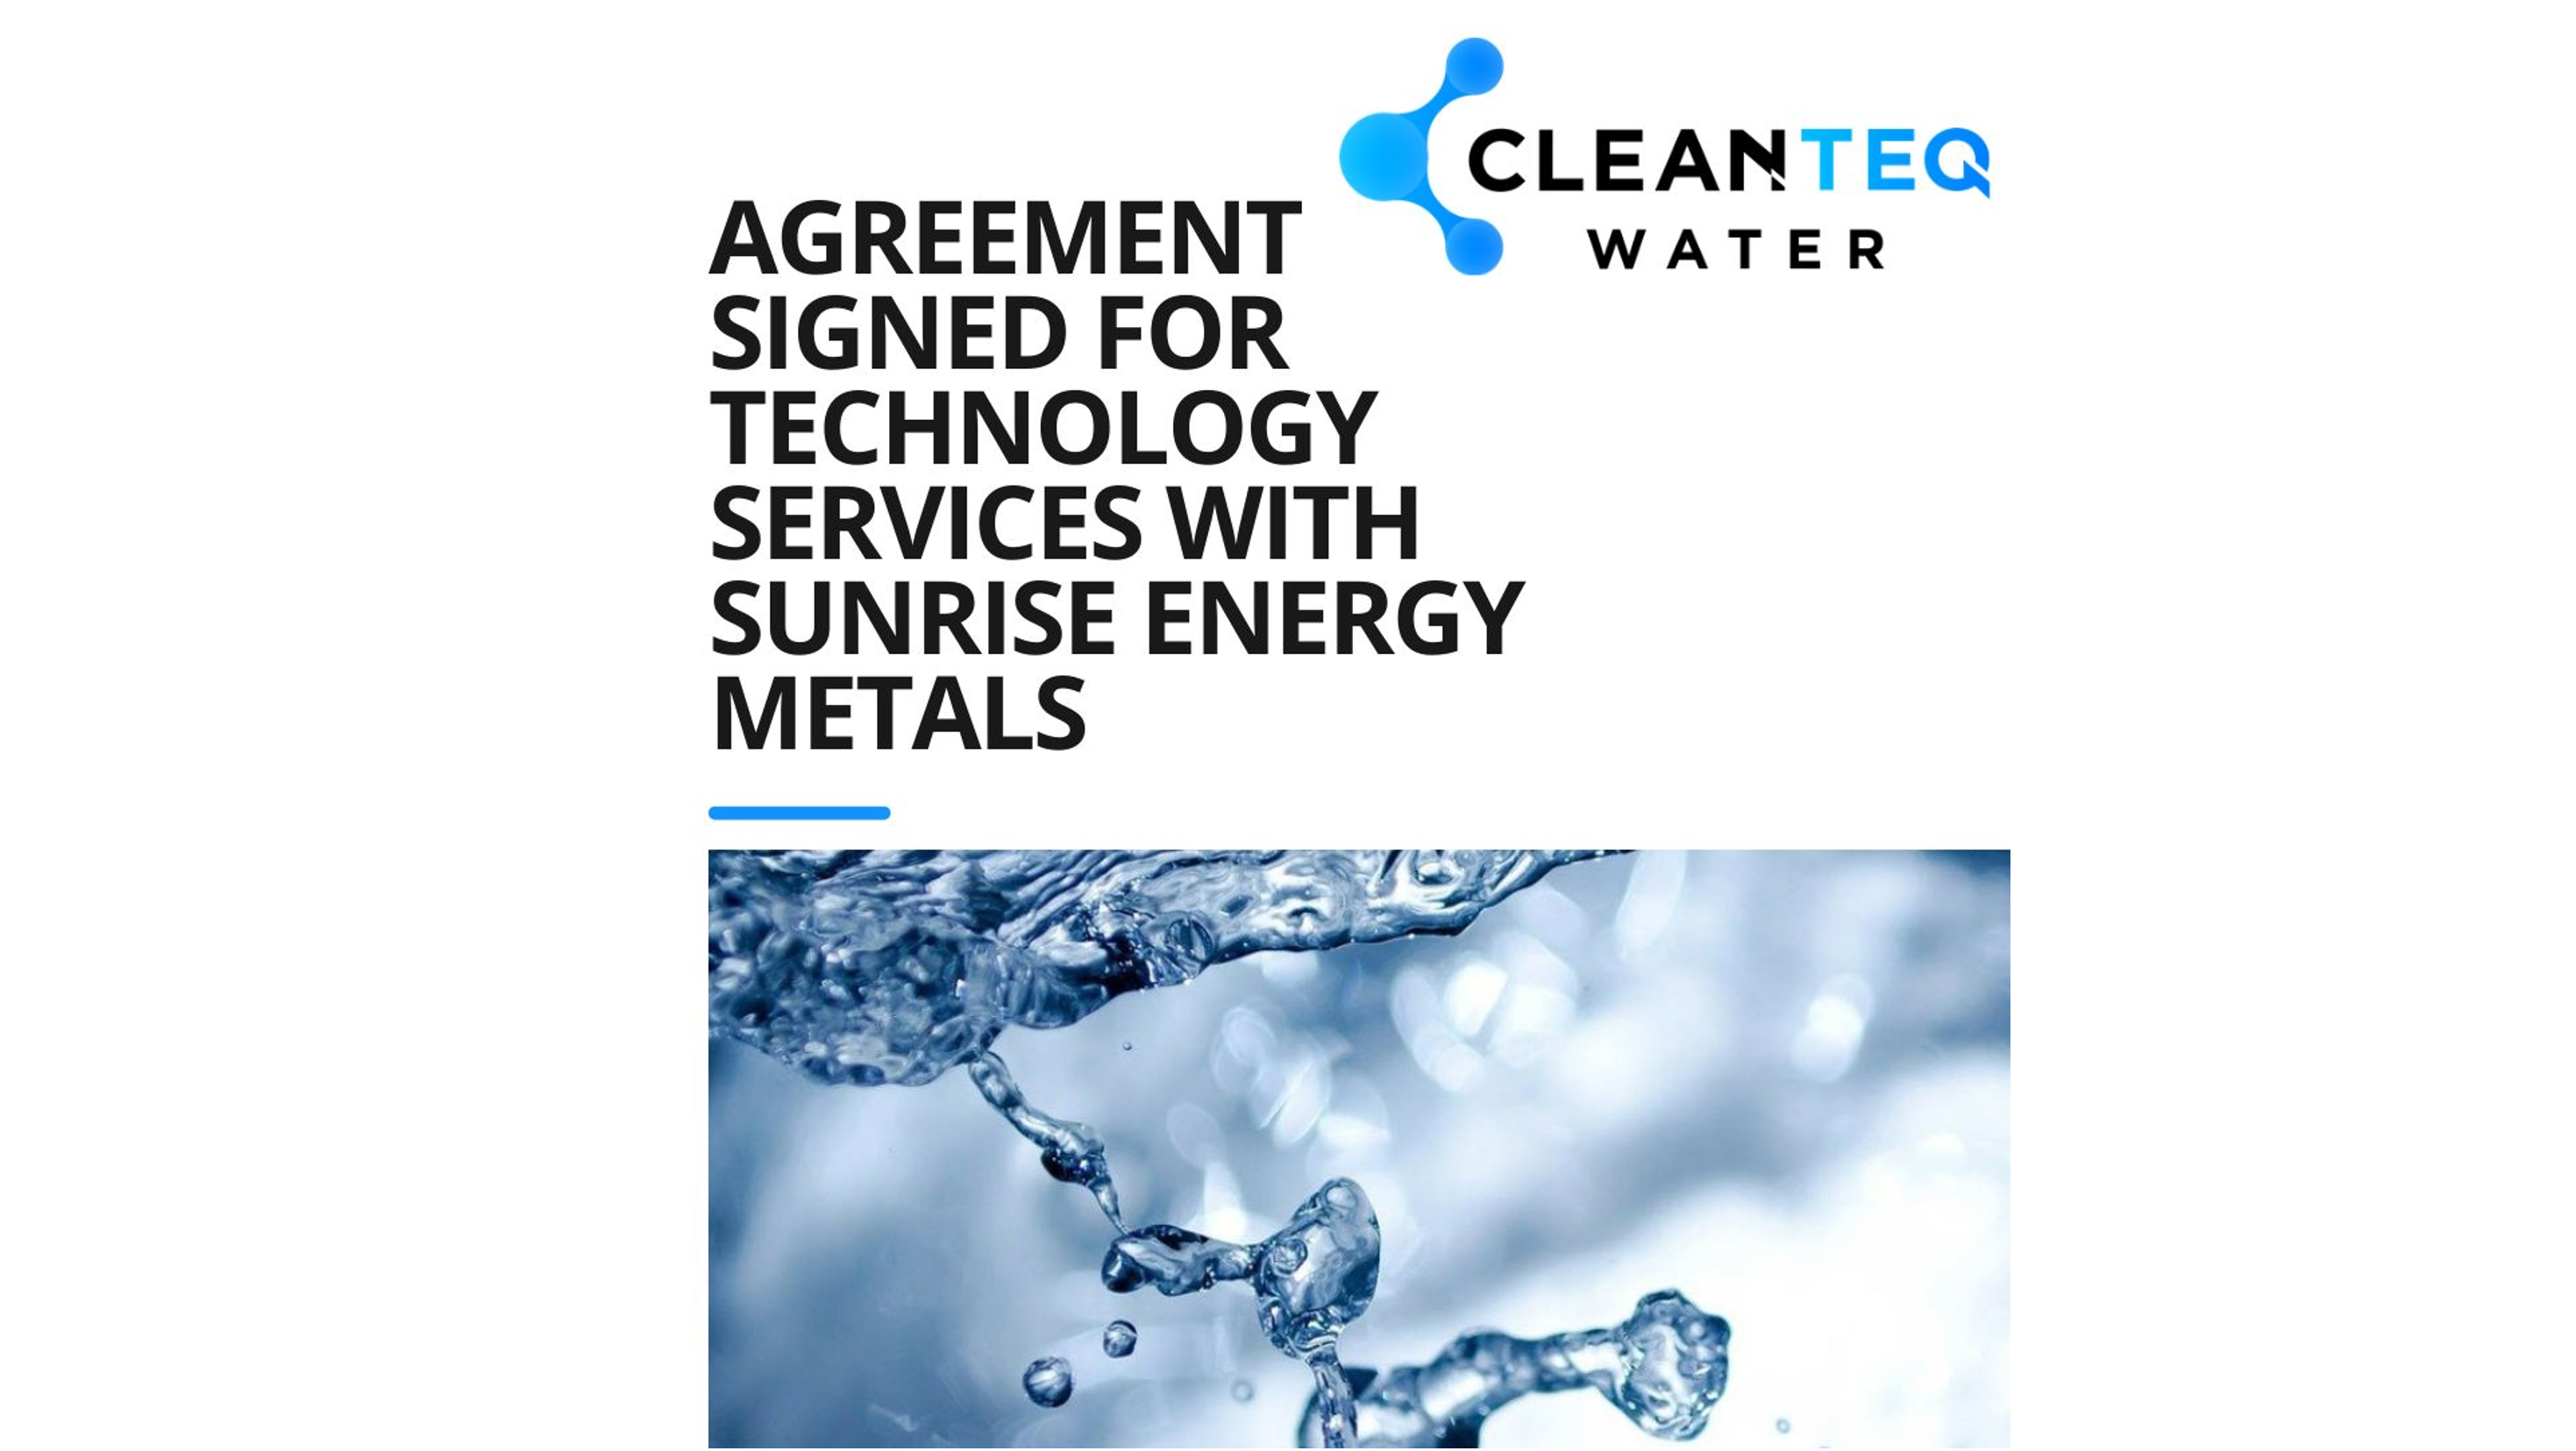 Clean TeQ Water Signs Agreement for Technology Services with Sunrise Energy Metals